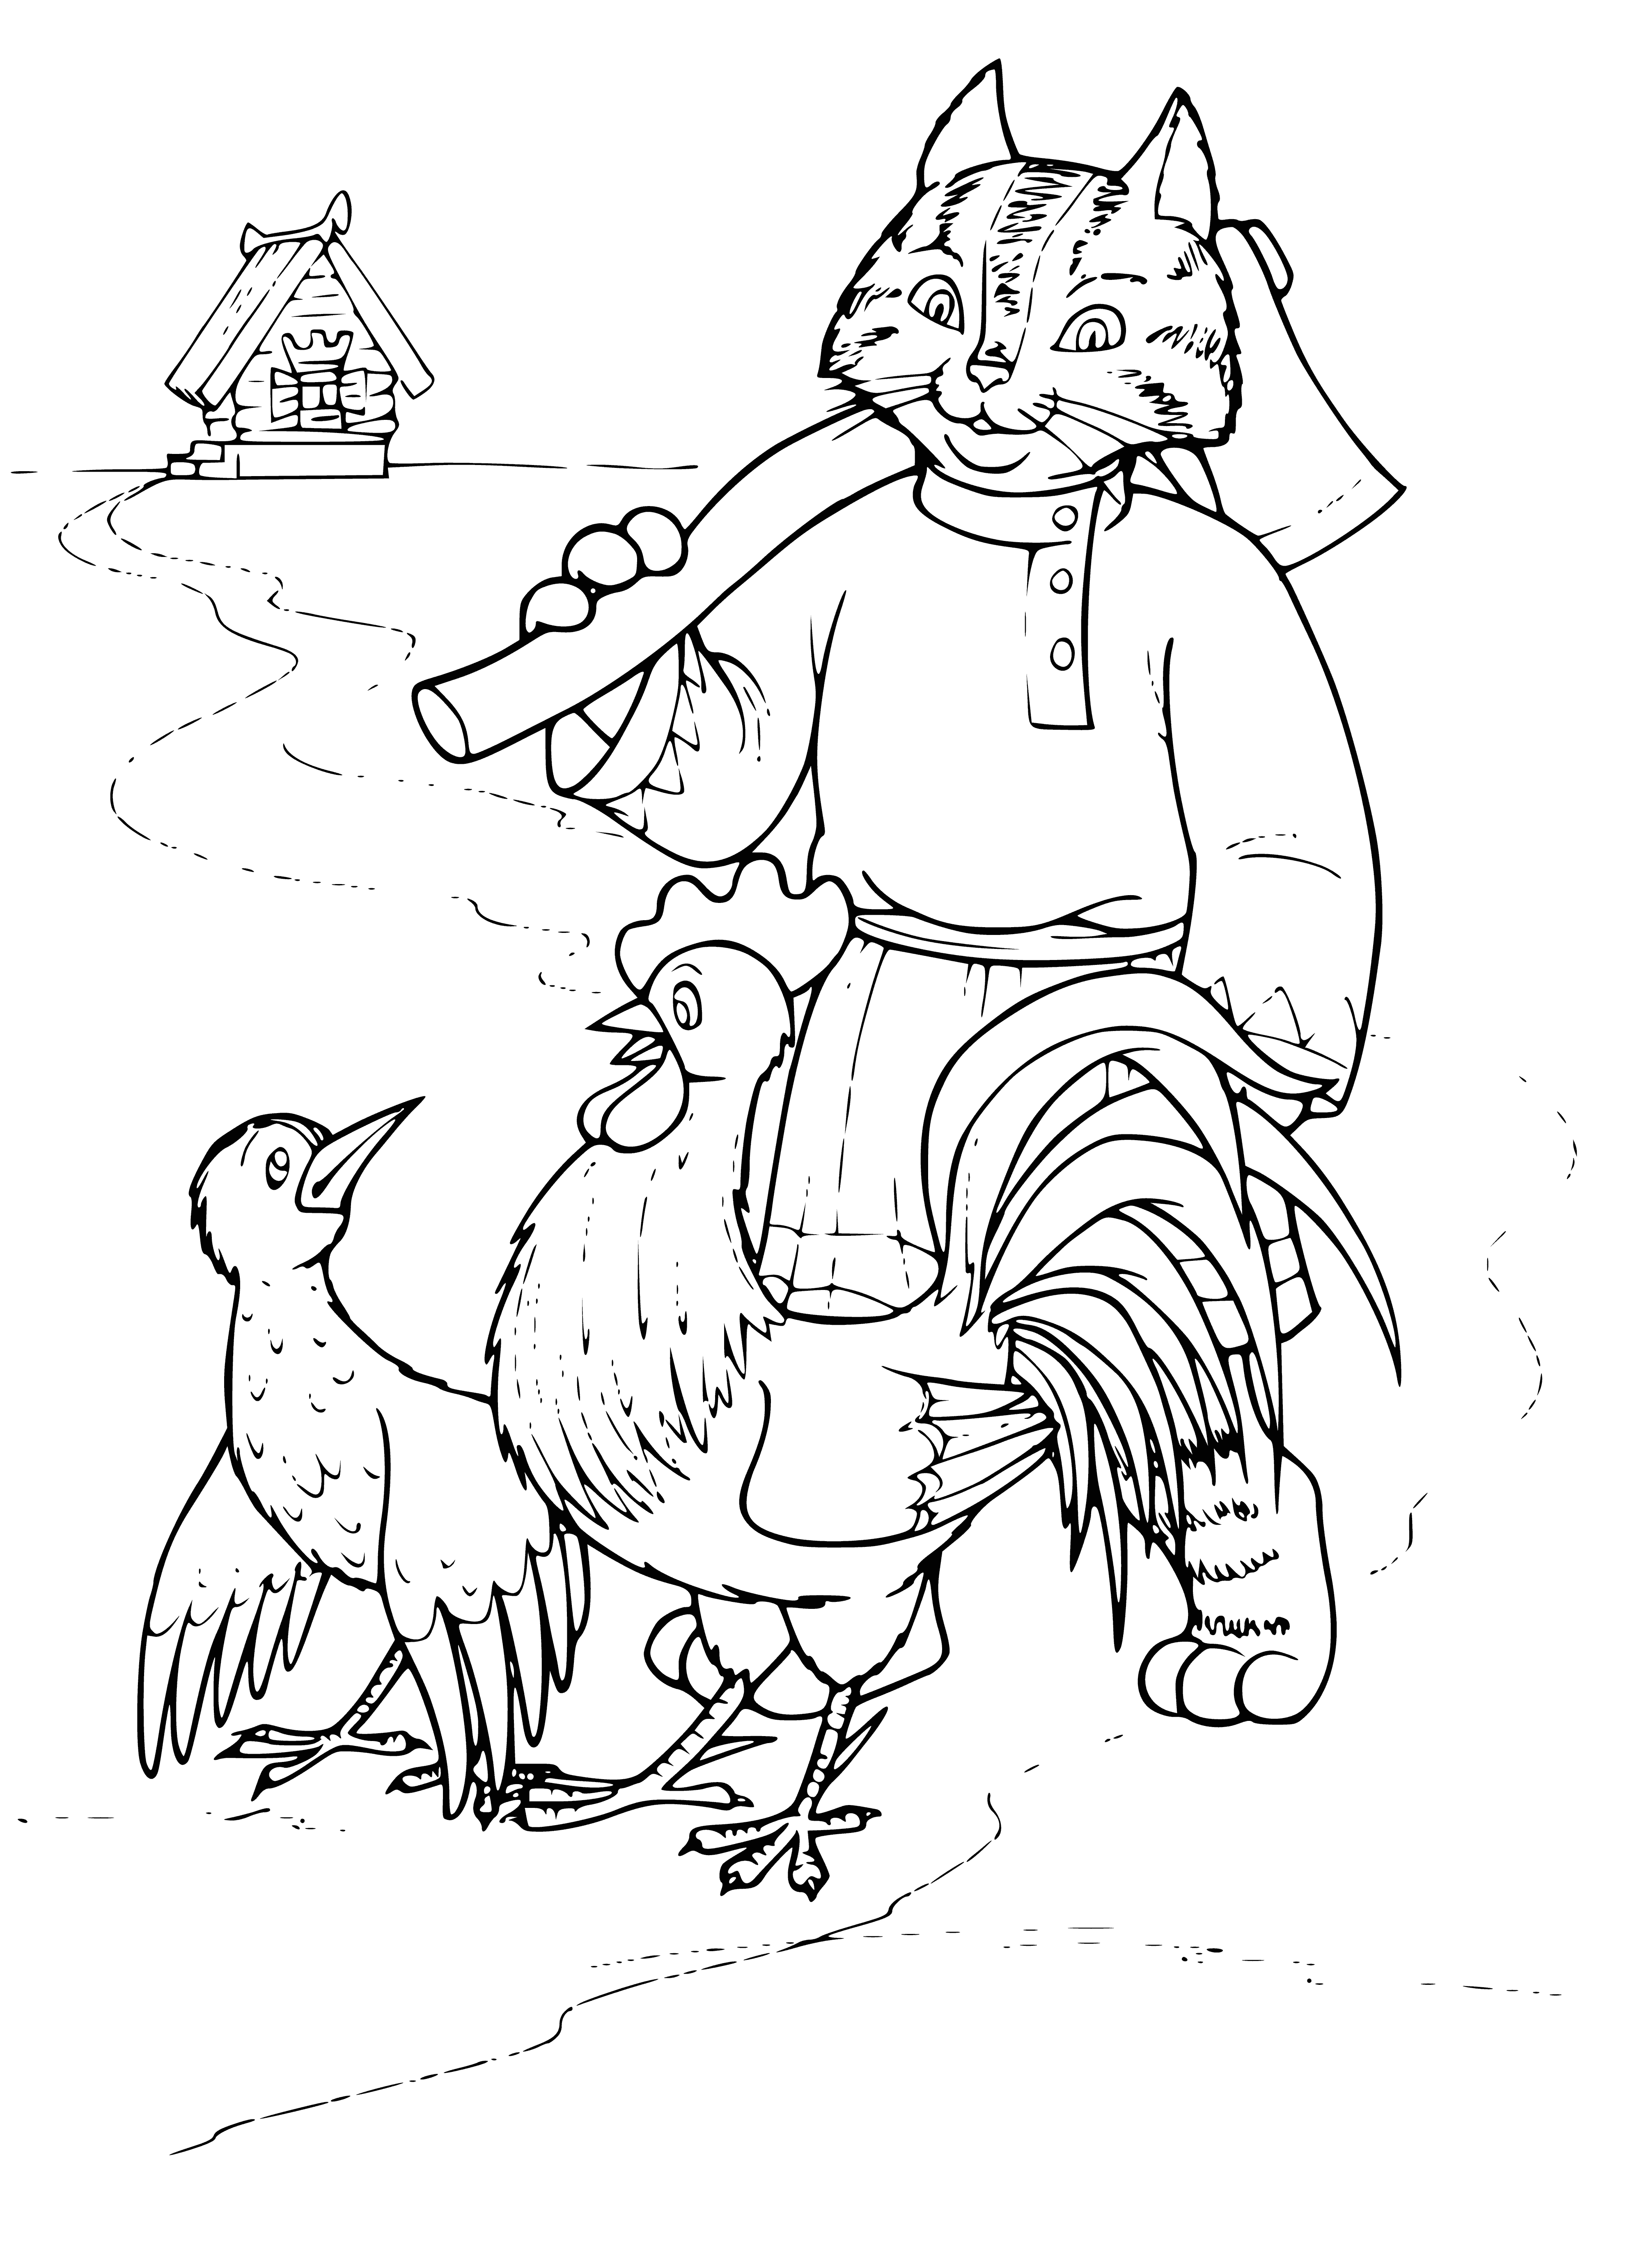 Cat, thrush and rooster coloring page